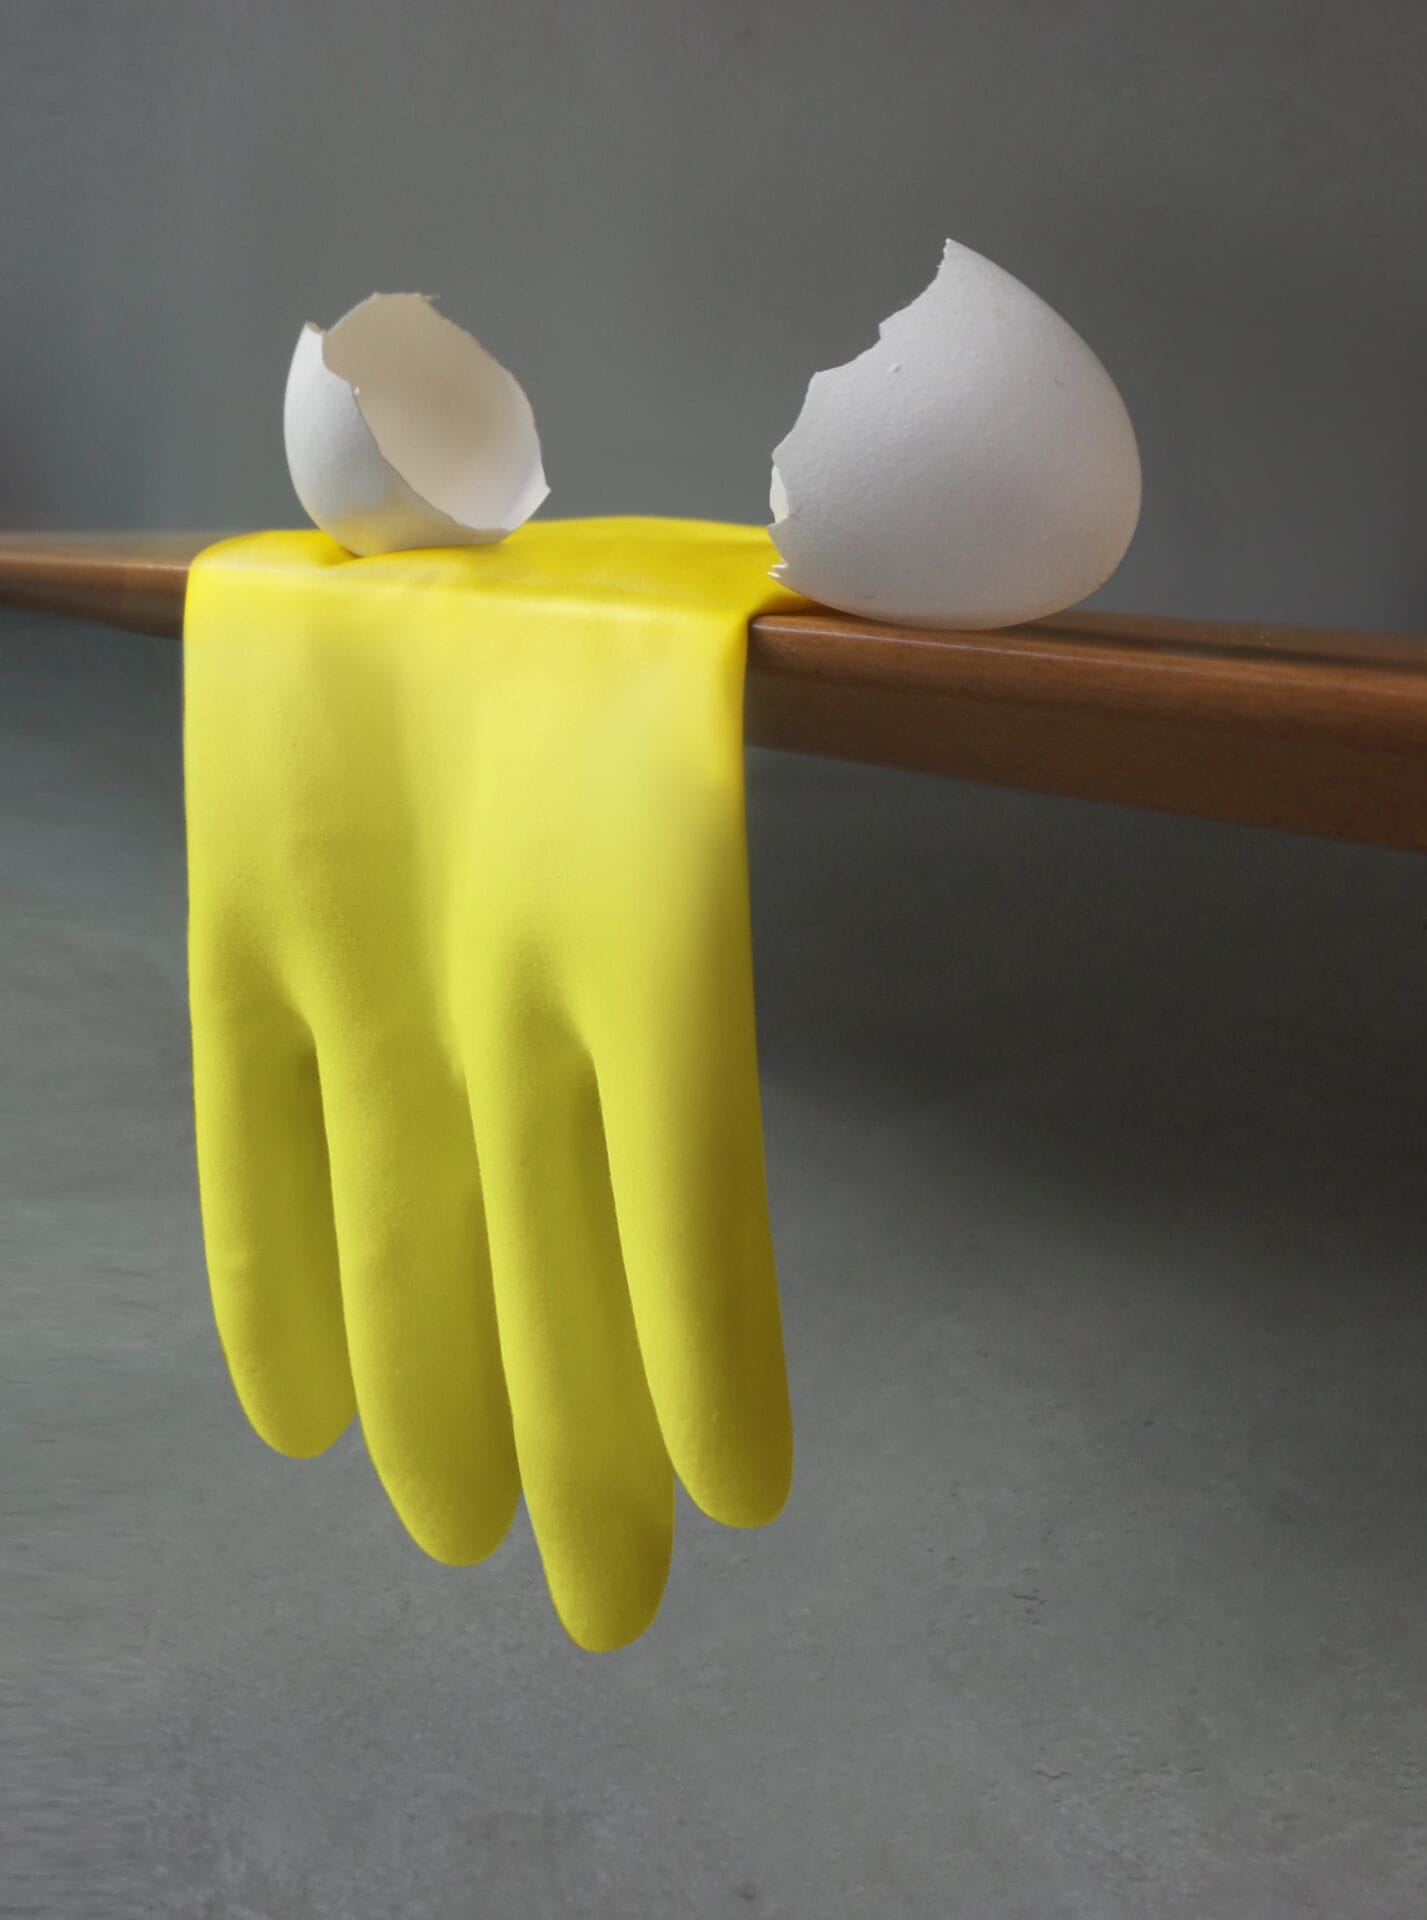 a yellow rubber glove drapes off of a shelf, with a broken egg shell near it, resembling the liquid part of the egg dripping